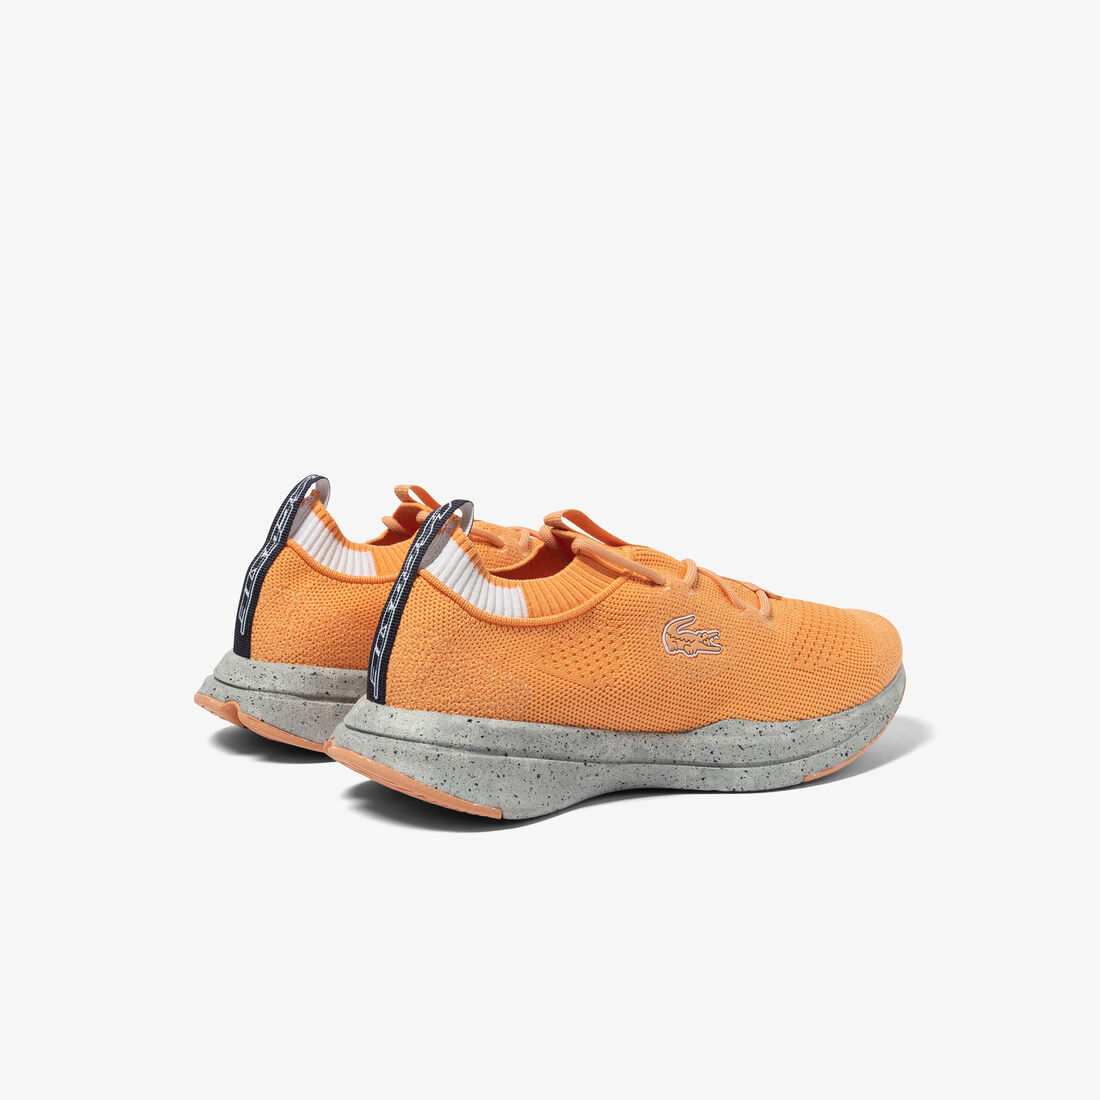 Women's Lacoste Run Spin Eco Textile Trainers